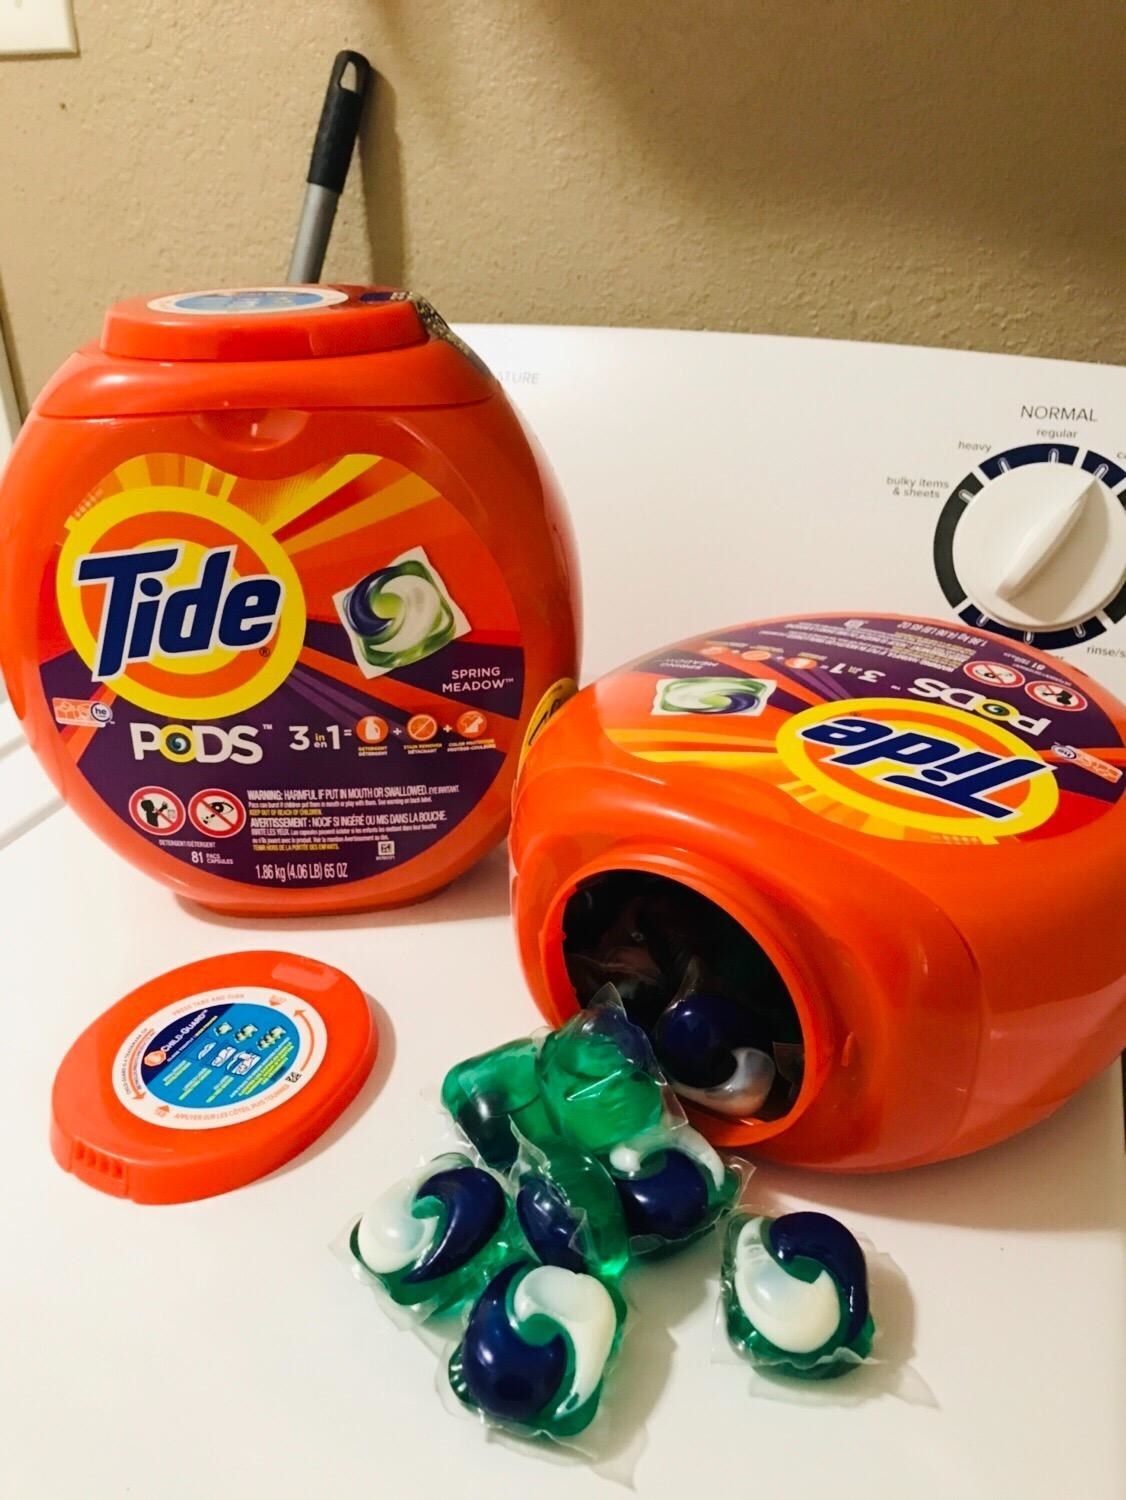 Two boxes of tide pods on white table